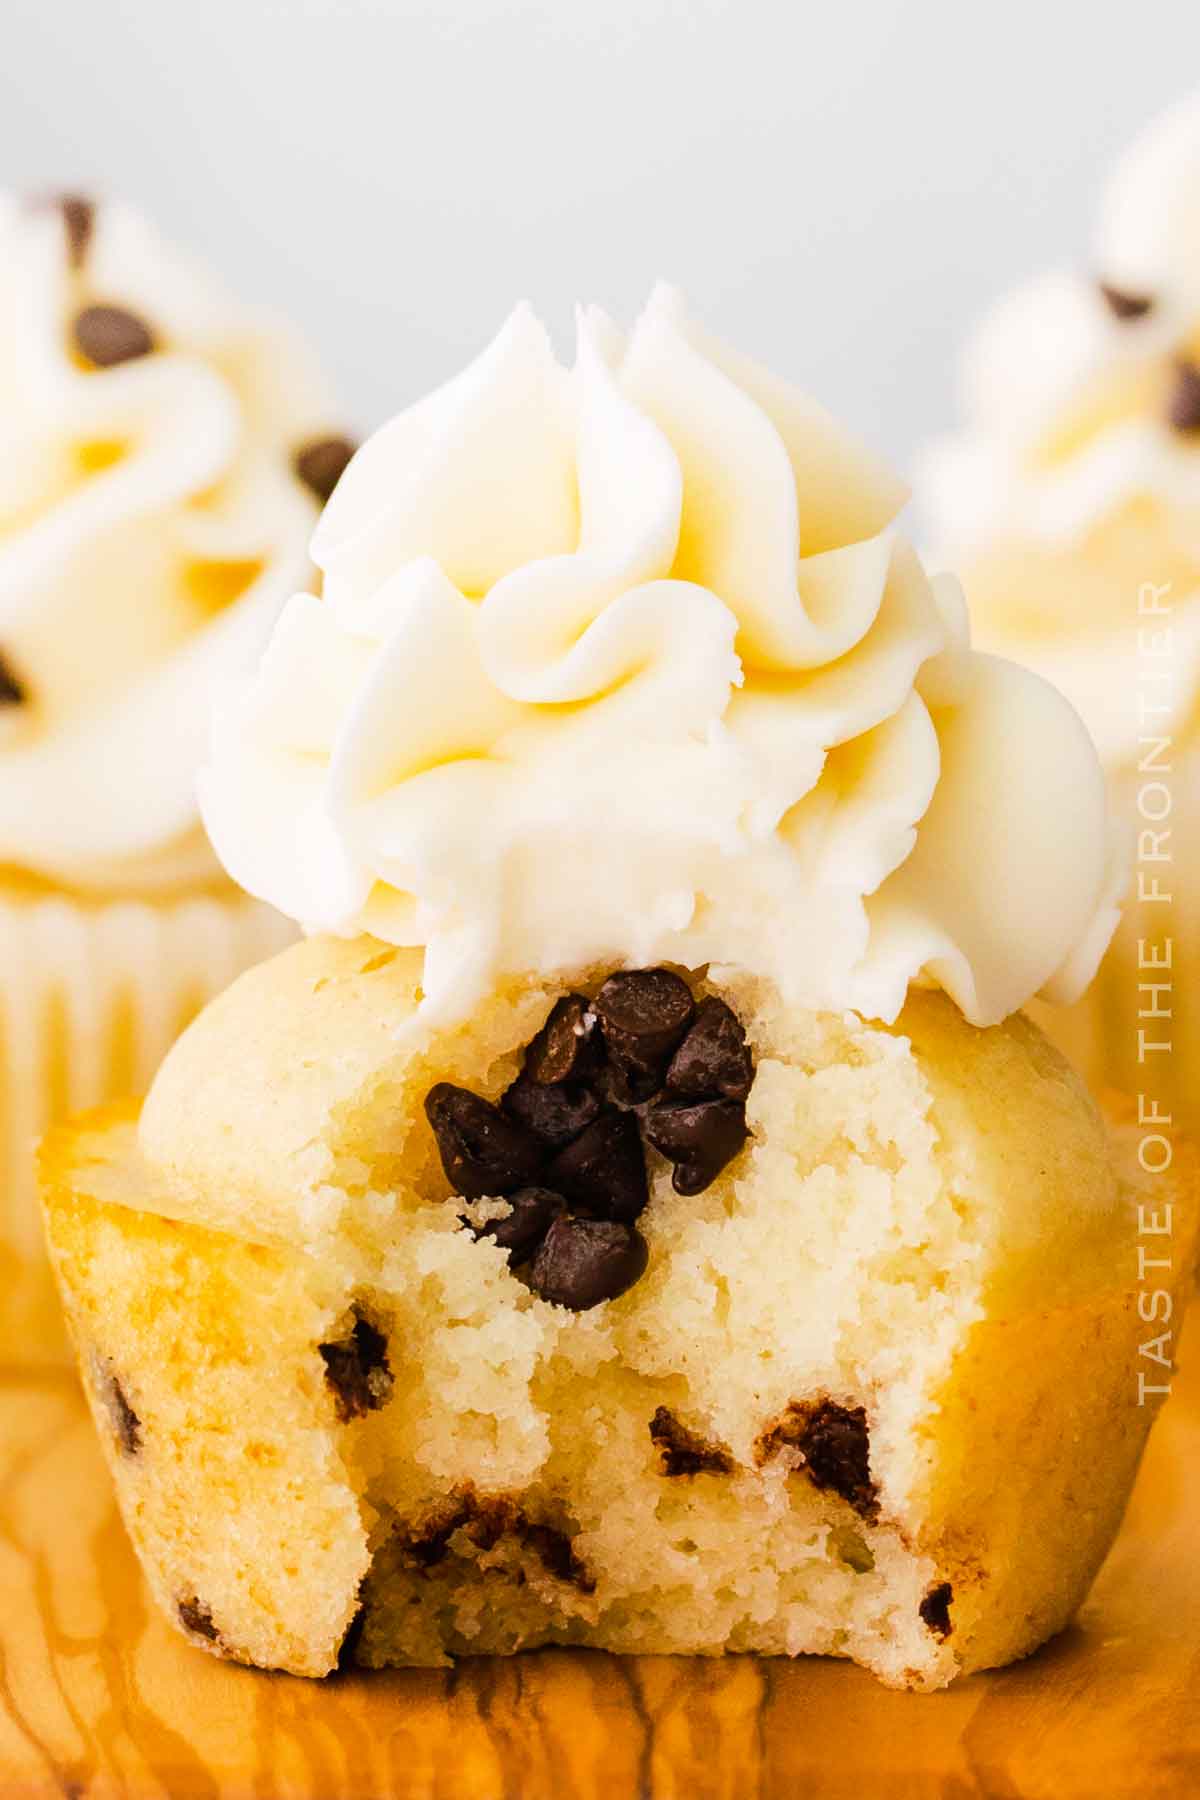 cupcakes filled with chocolate chips